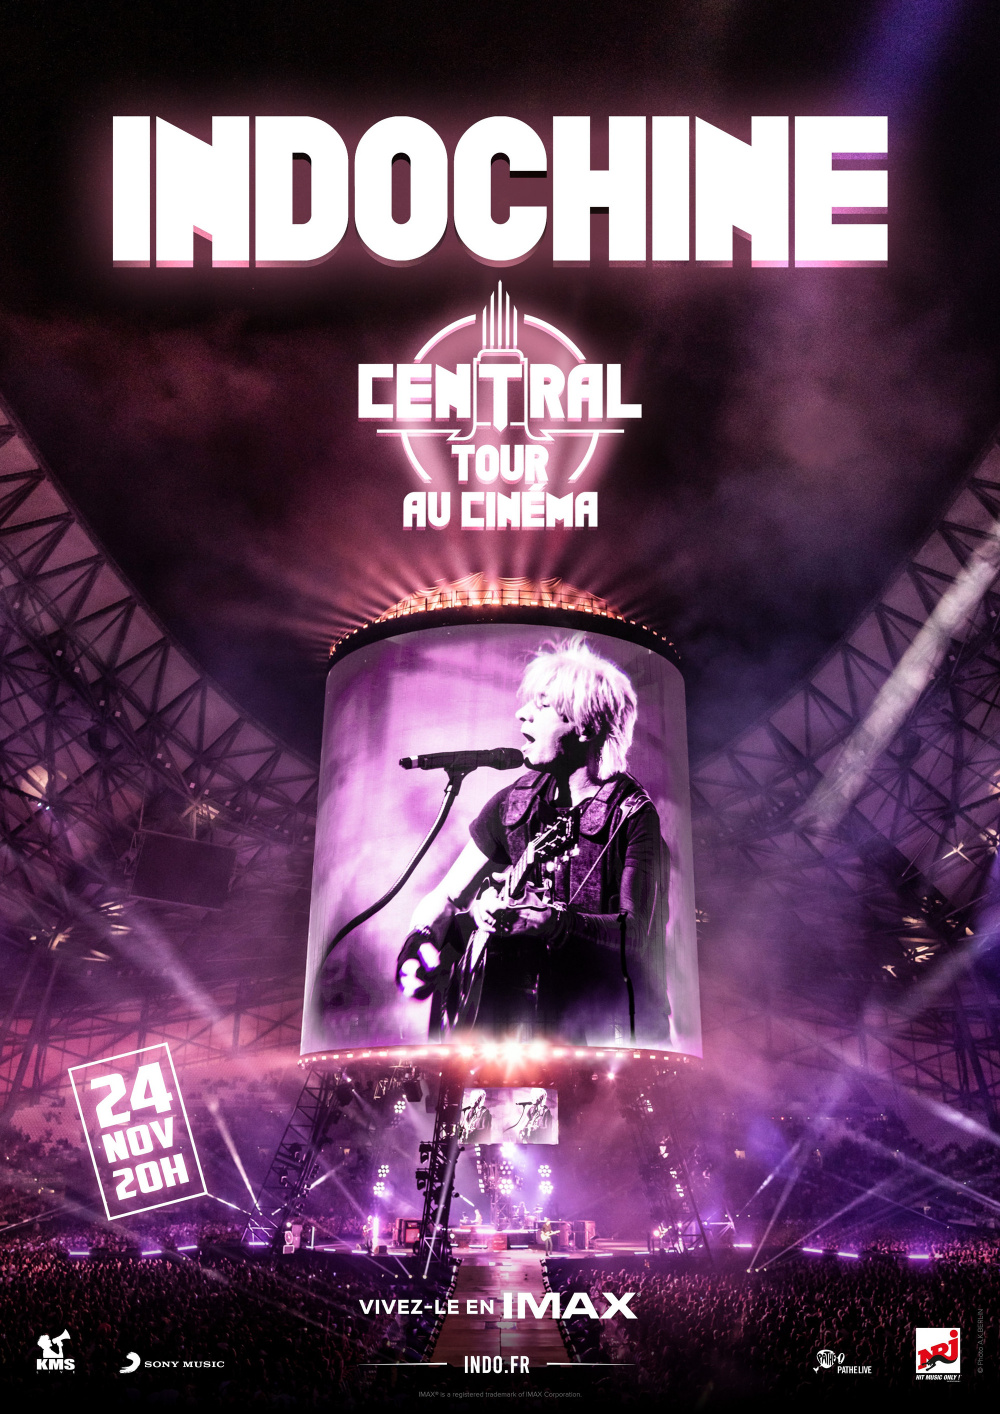 indochine central tour station 13